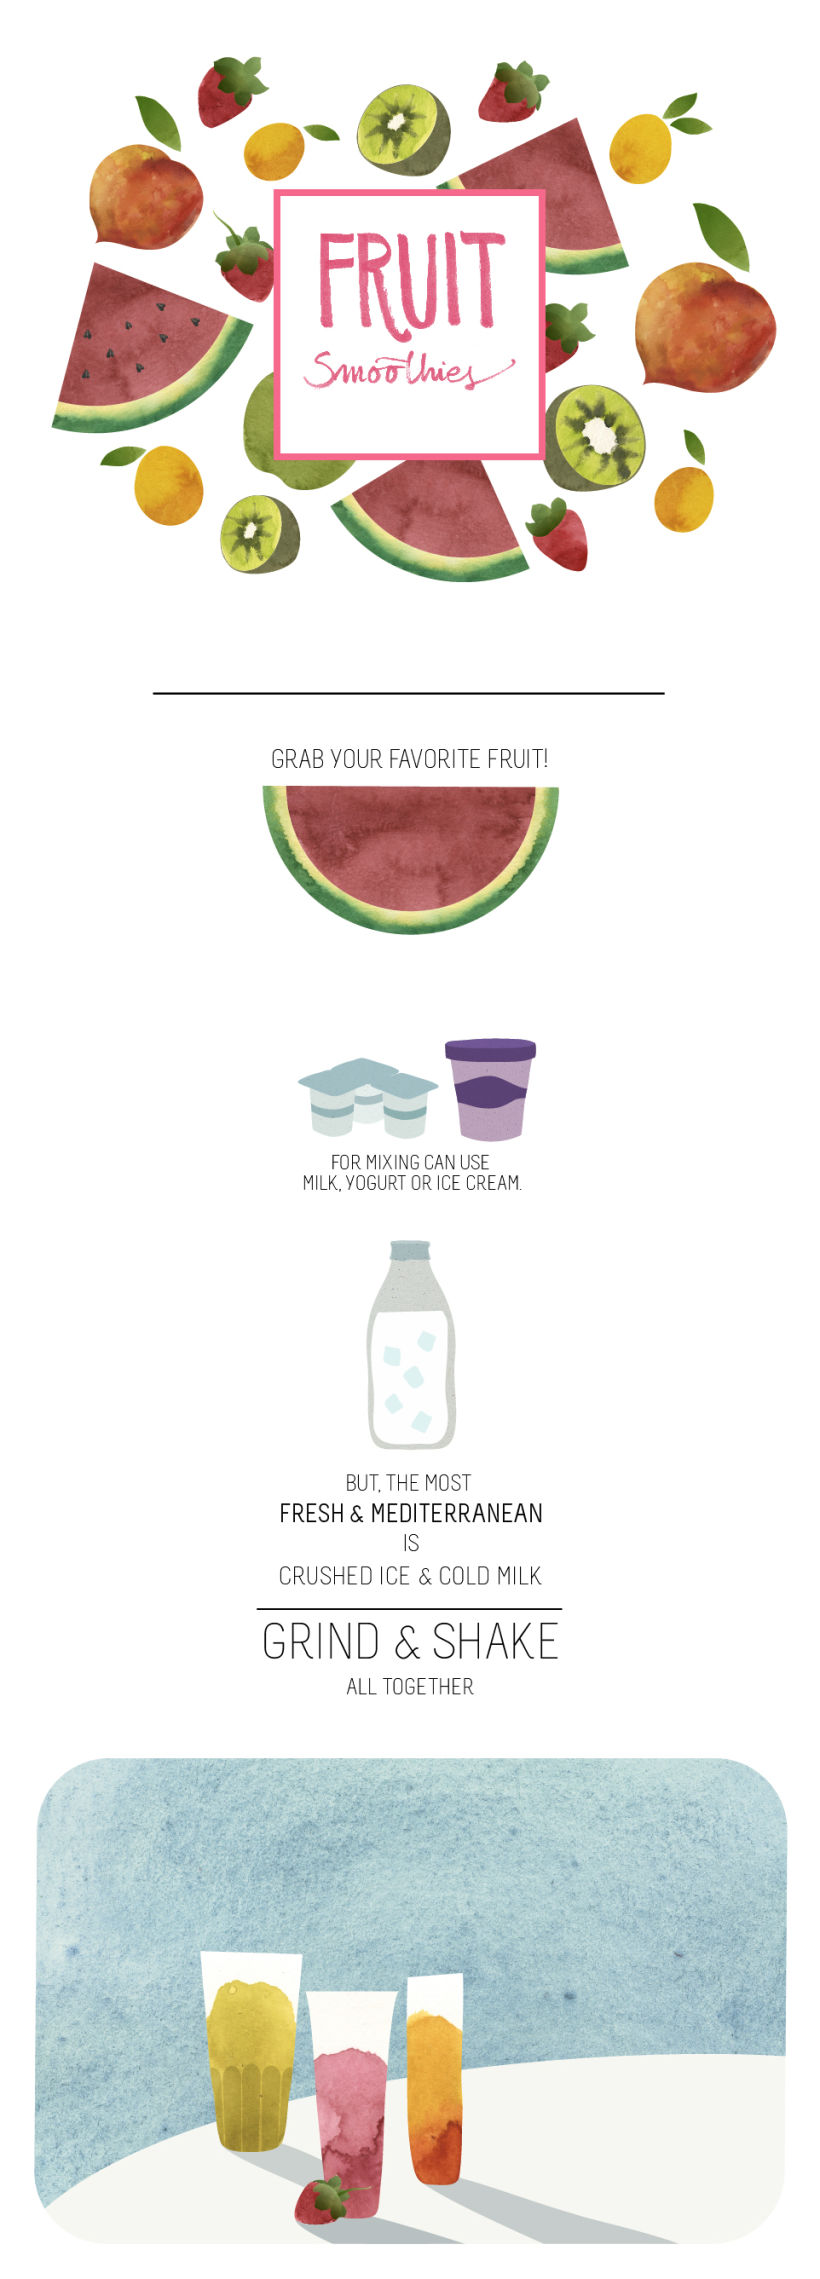 Fruit Smoothies | Book project 2